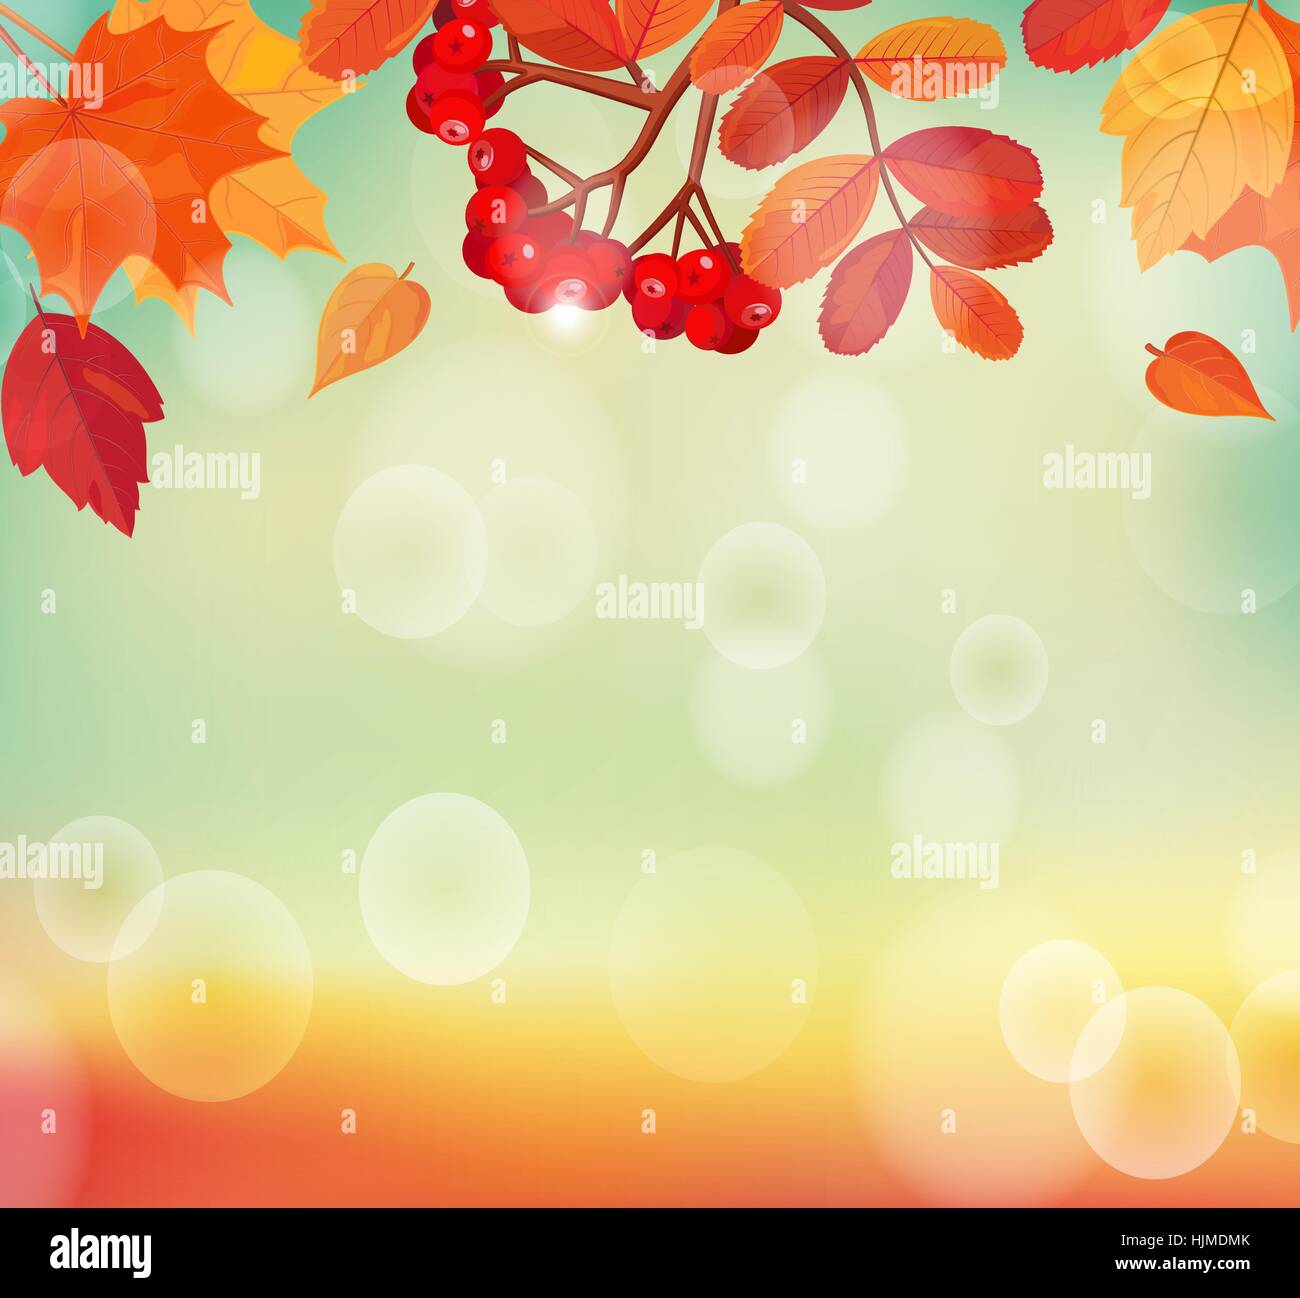 Autumn background with colorful leaves and rowan. EPS 10 vector illustration. Stock Vector